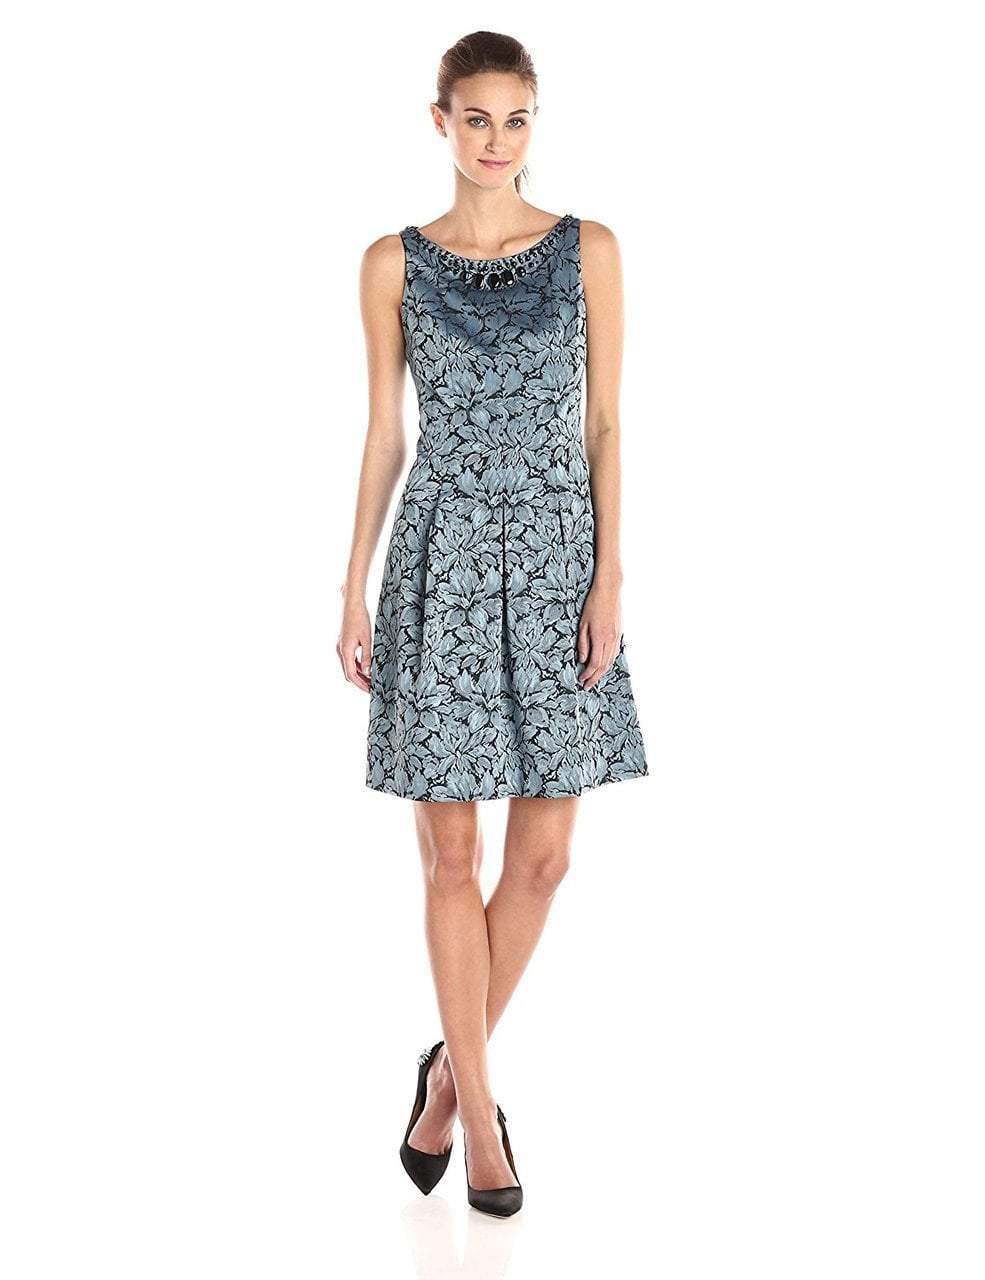 Adrianna Papell - Floral Print Jacquard Short Dress 15252820 in Floral and Blue